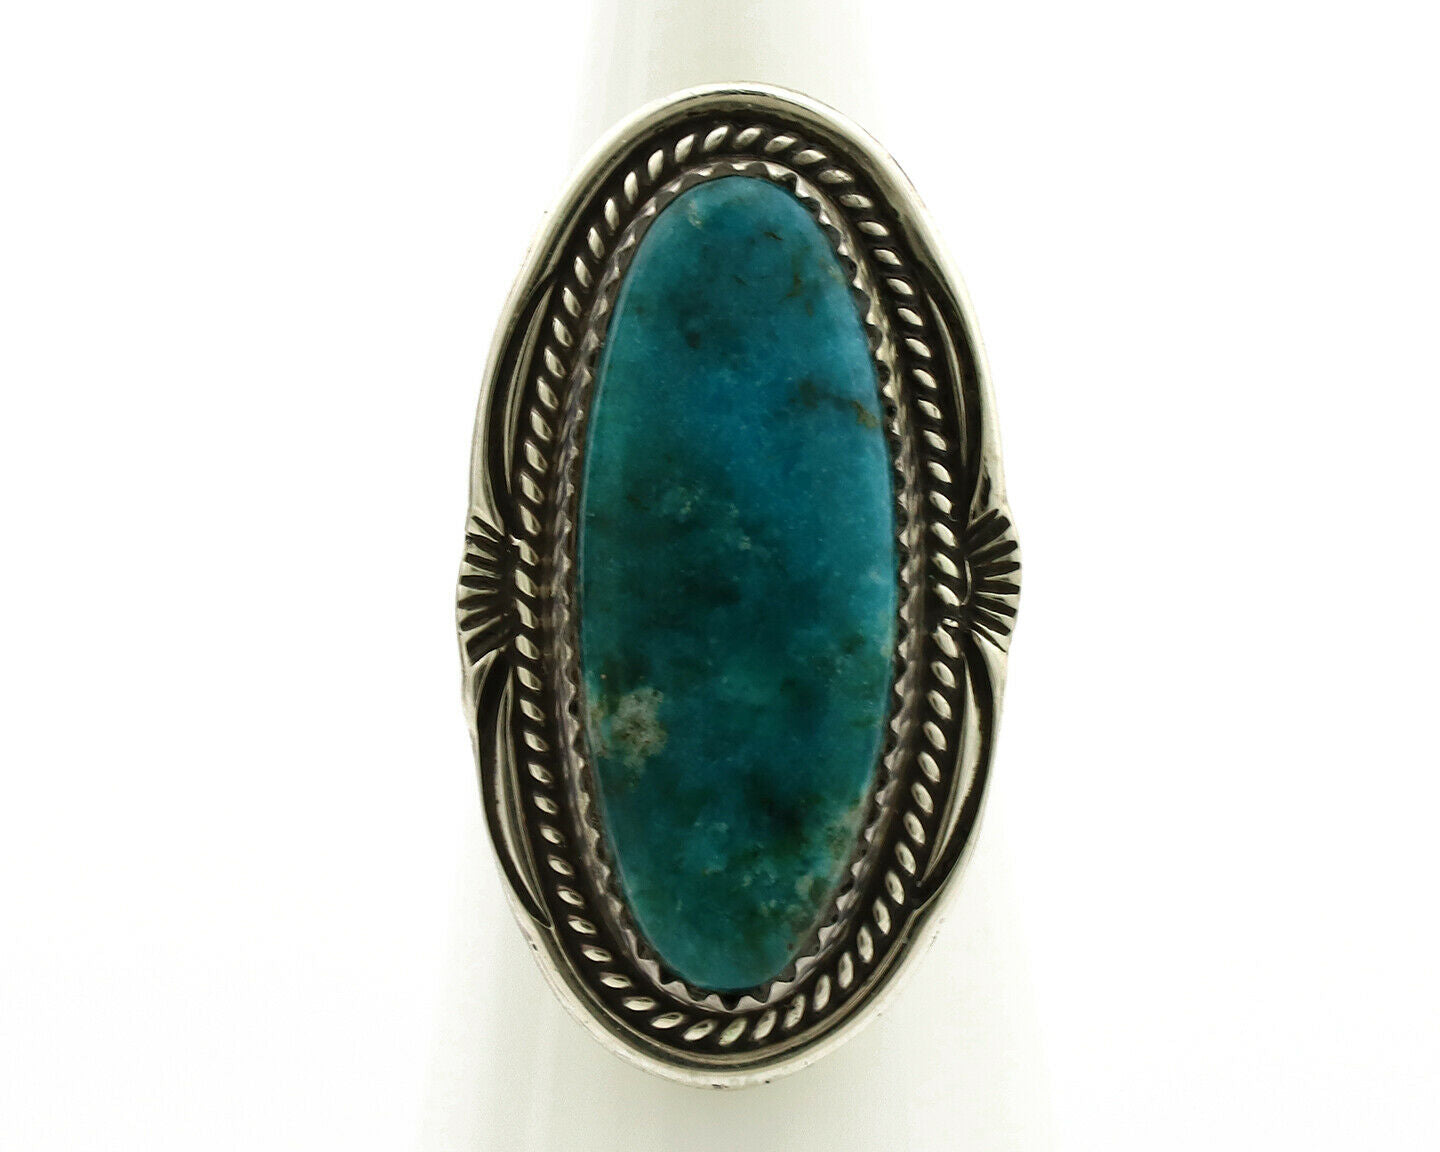 Navajo Ring .925 Silver Blue Gem Turquoise Artist Signed M Begay C.1980's